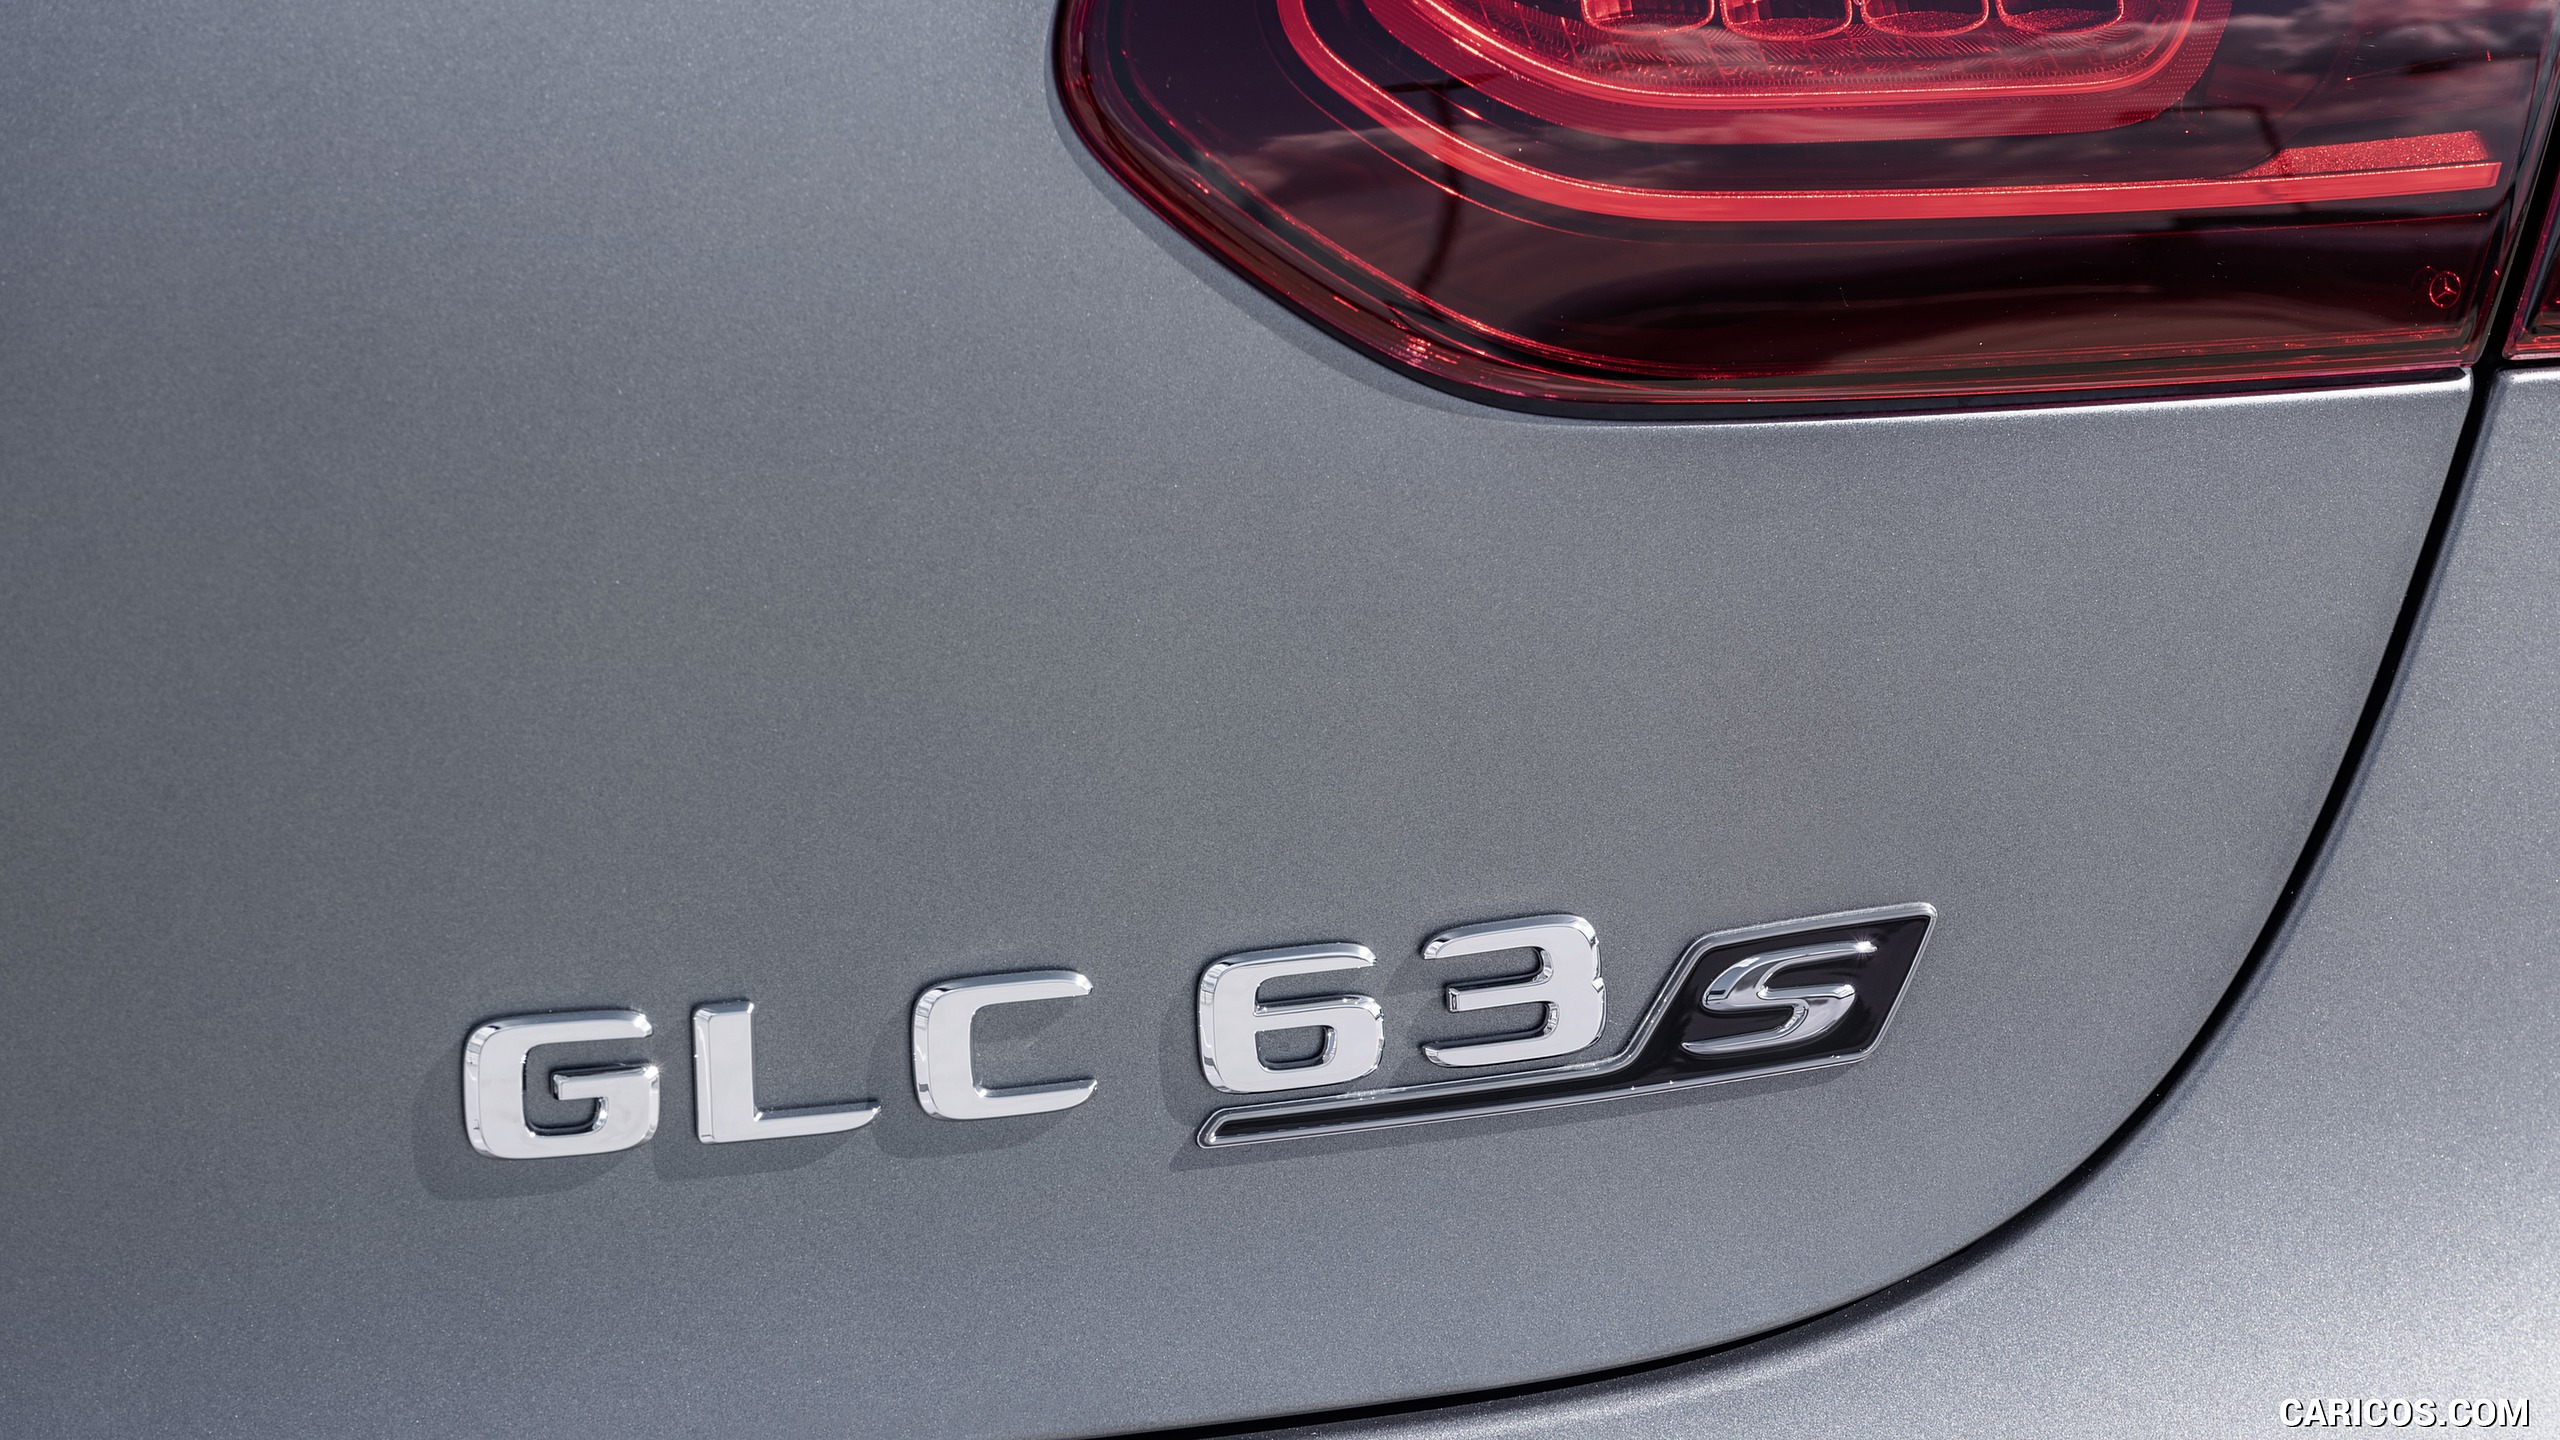 2020 Mercedes-AMG GLC 63 S 4MATIC+ Coupe - Badge, #16 of 102